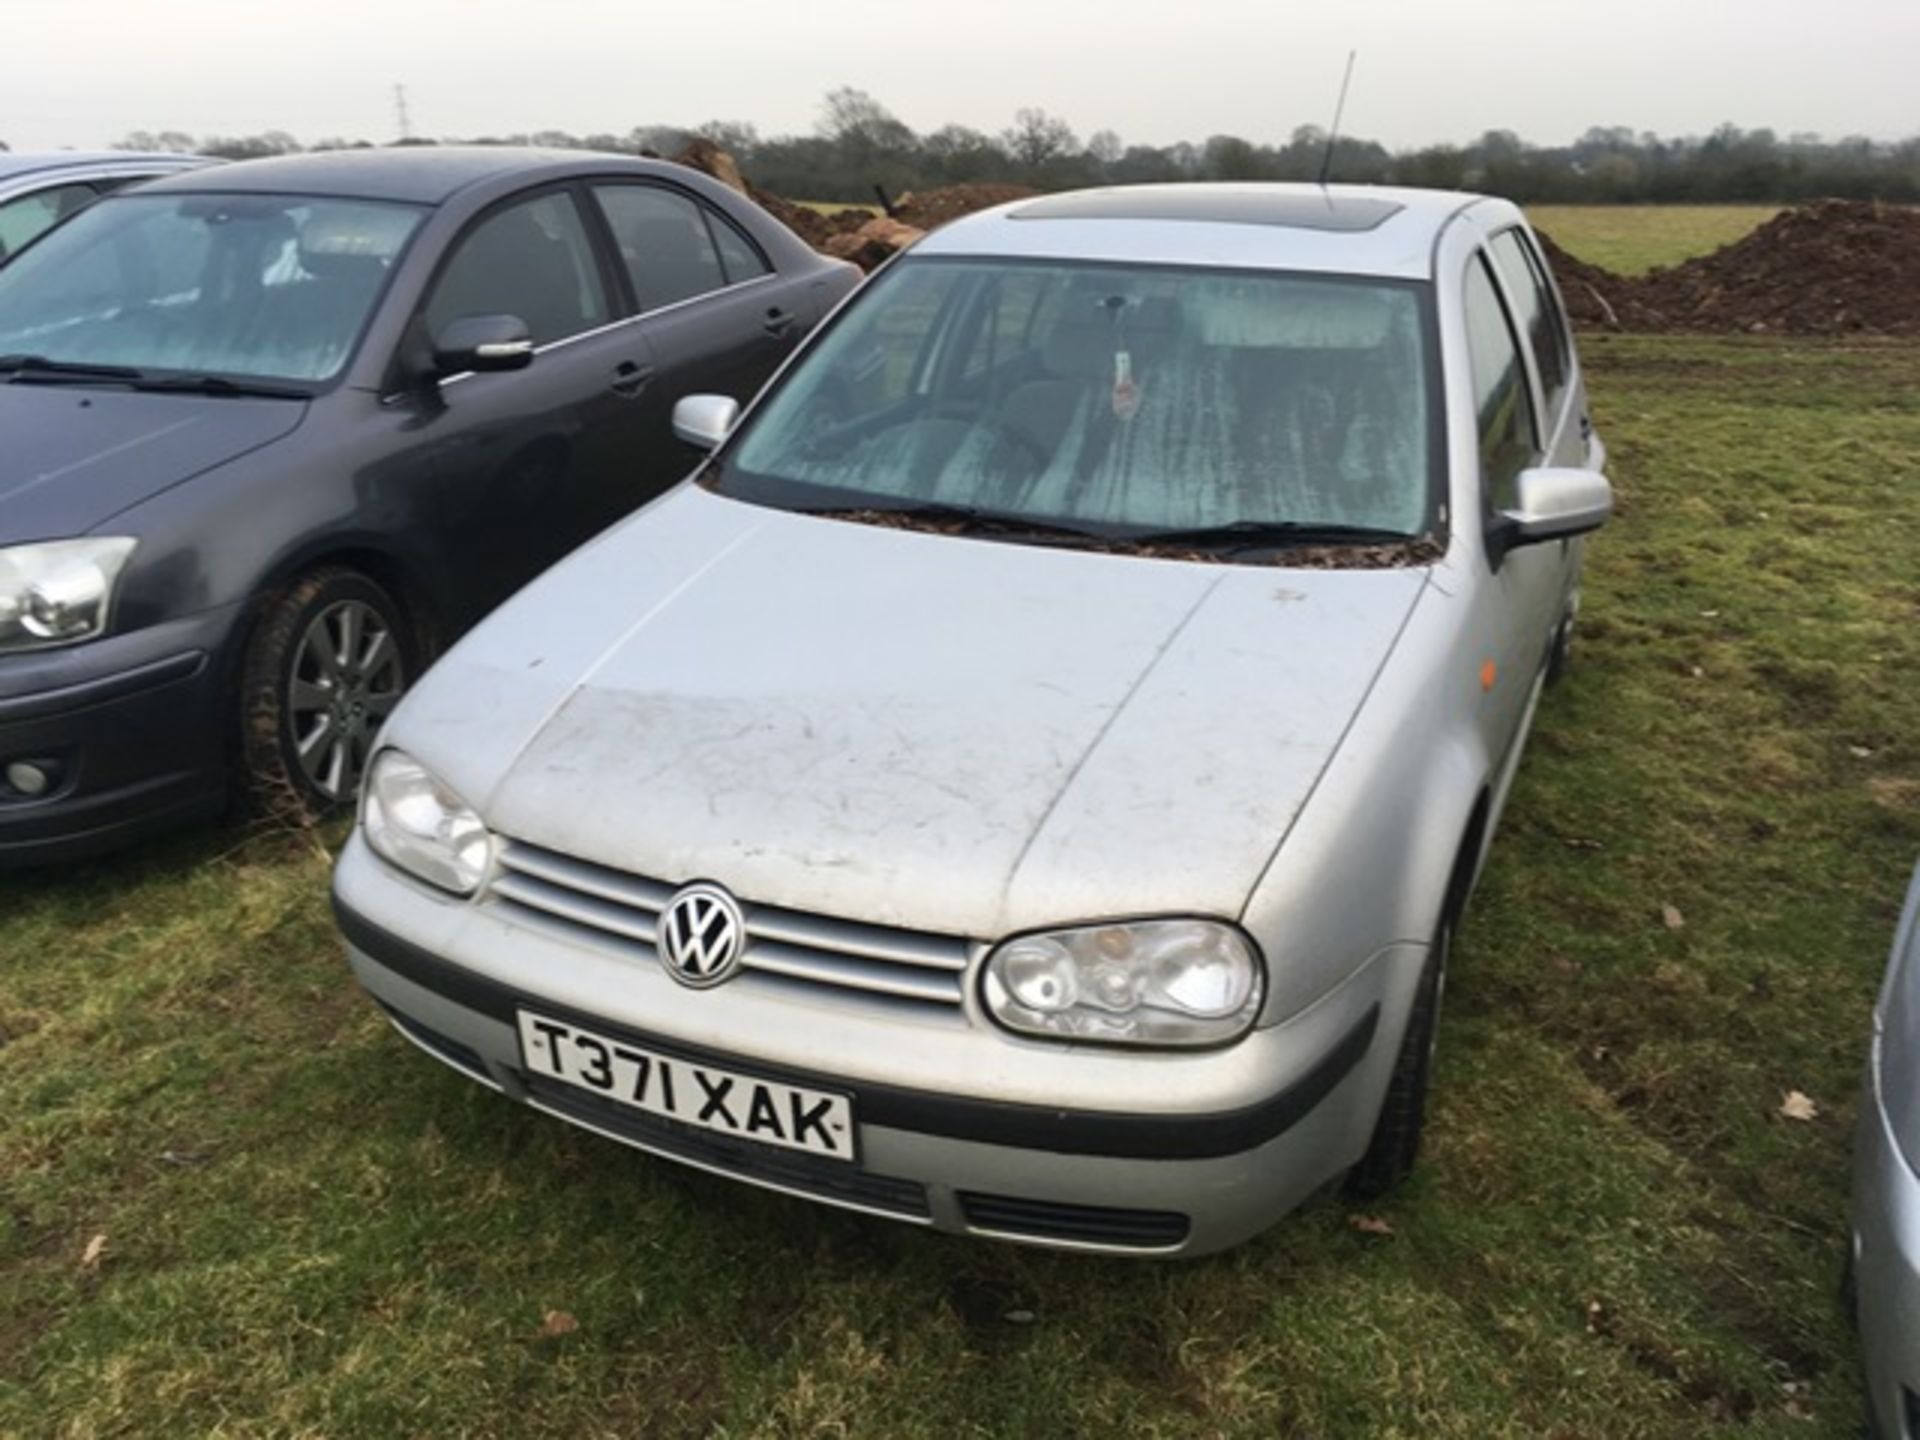 VW Golf 1.6 5 dr hatchback Registration Number T371 XAK THIS VEHICLE IS BEING SOLD AS SPARES OR